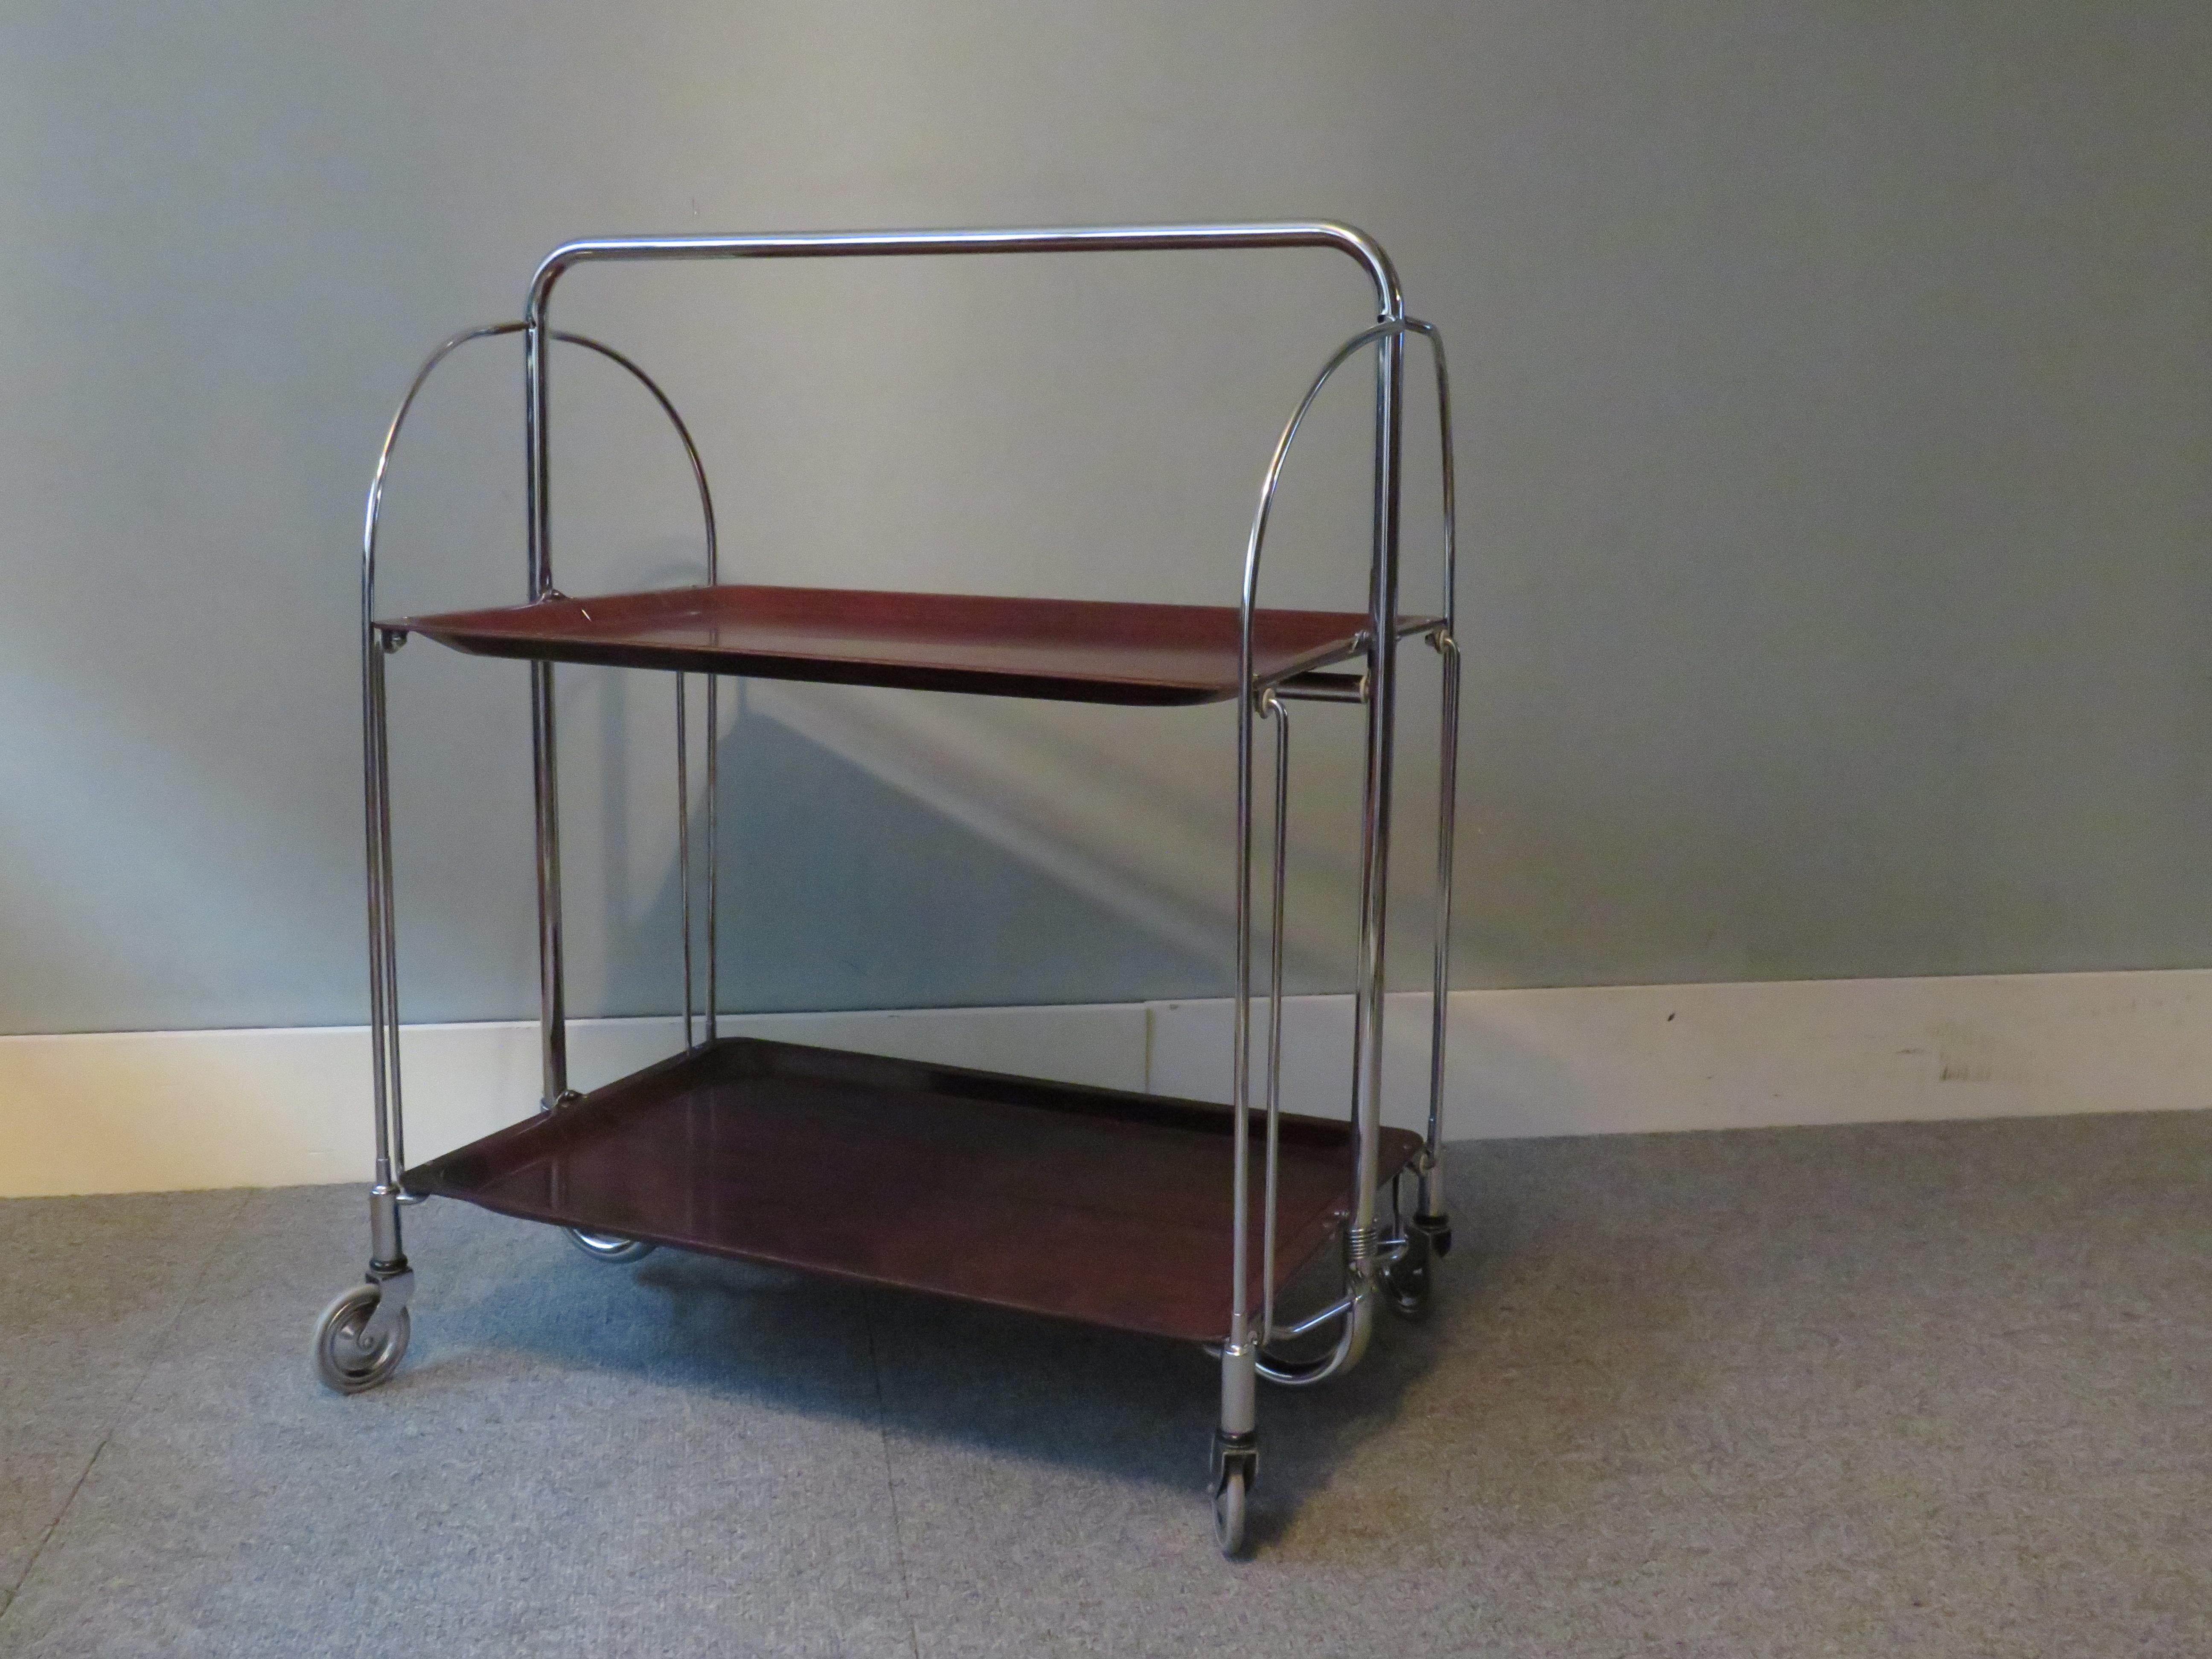 Bremshey Gerlinol Dinett trolley, after a design from 1950 by Bremshey & Co, Solingen Germany.
The trolley has a chromed steel frame and 2 folding Gerlinol blades made of pressed wood with resin coating.
It has 4 swivel wheels with rubber top